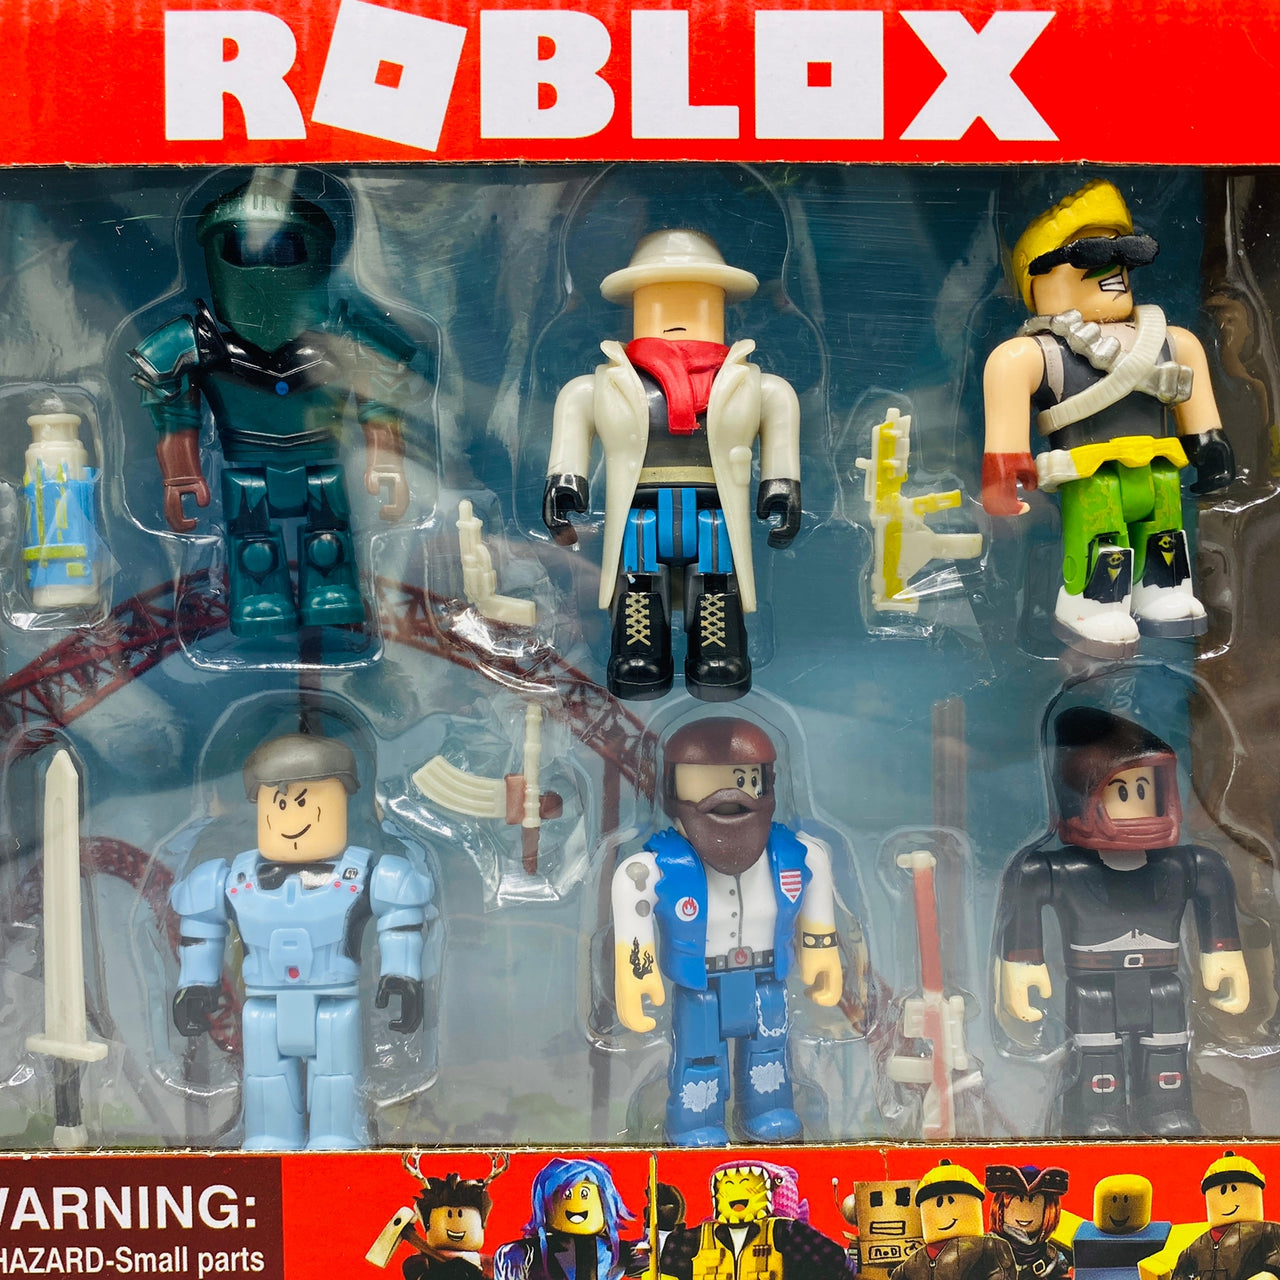 Legend Of Roblox Series Action Figure Pack Of 6